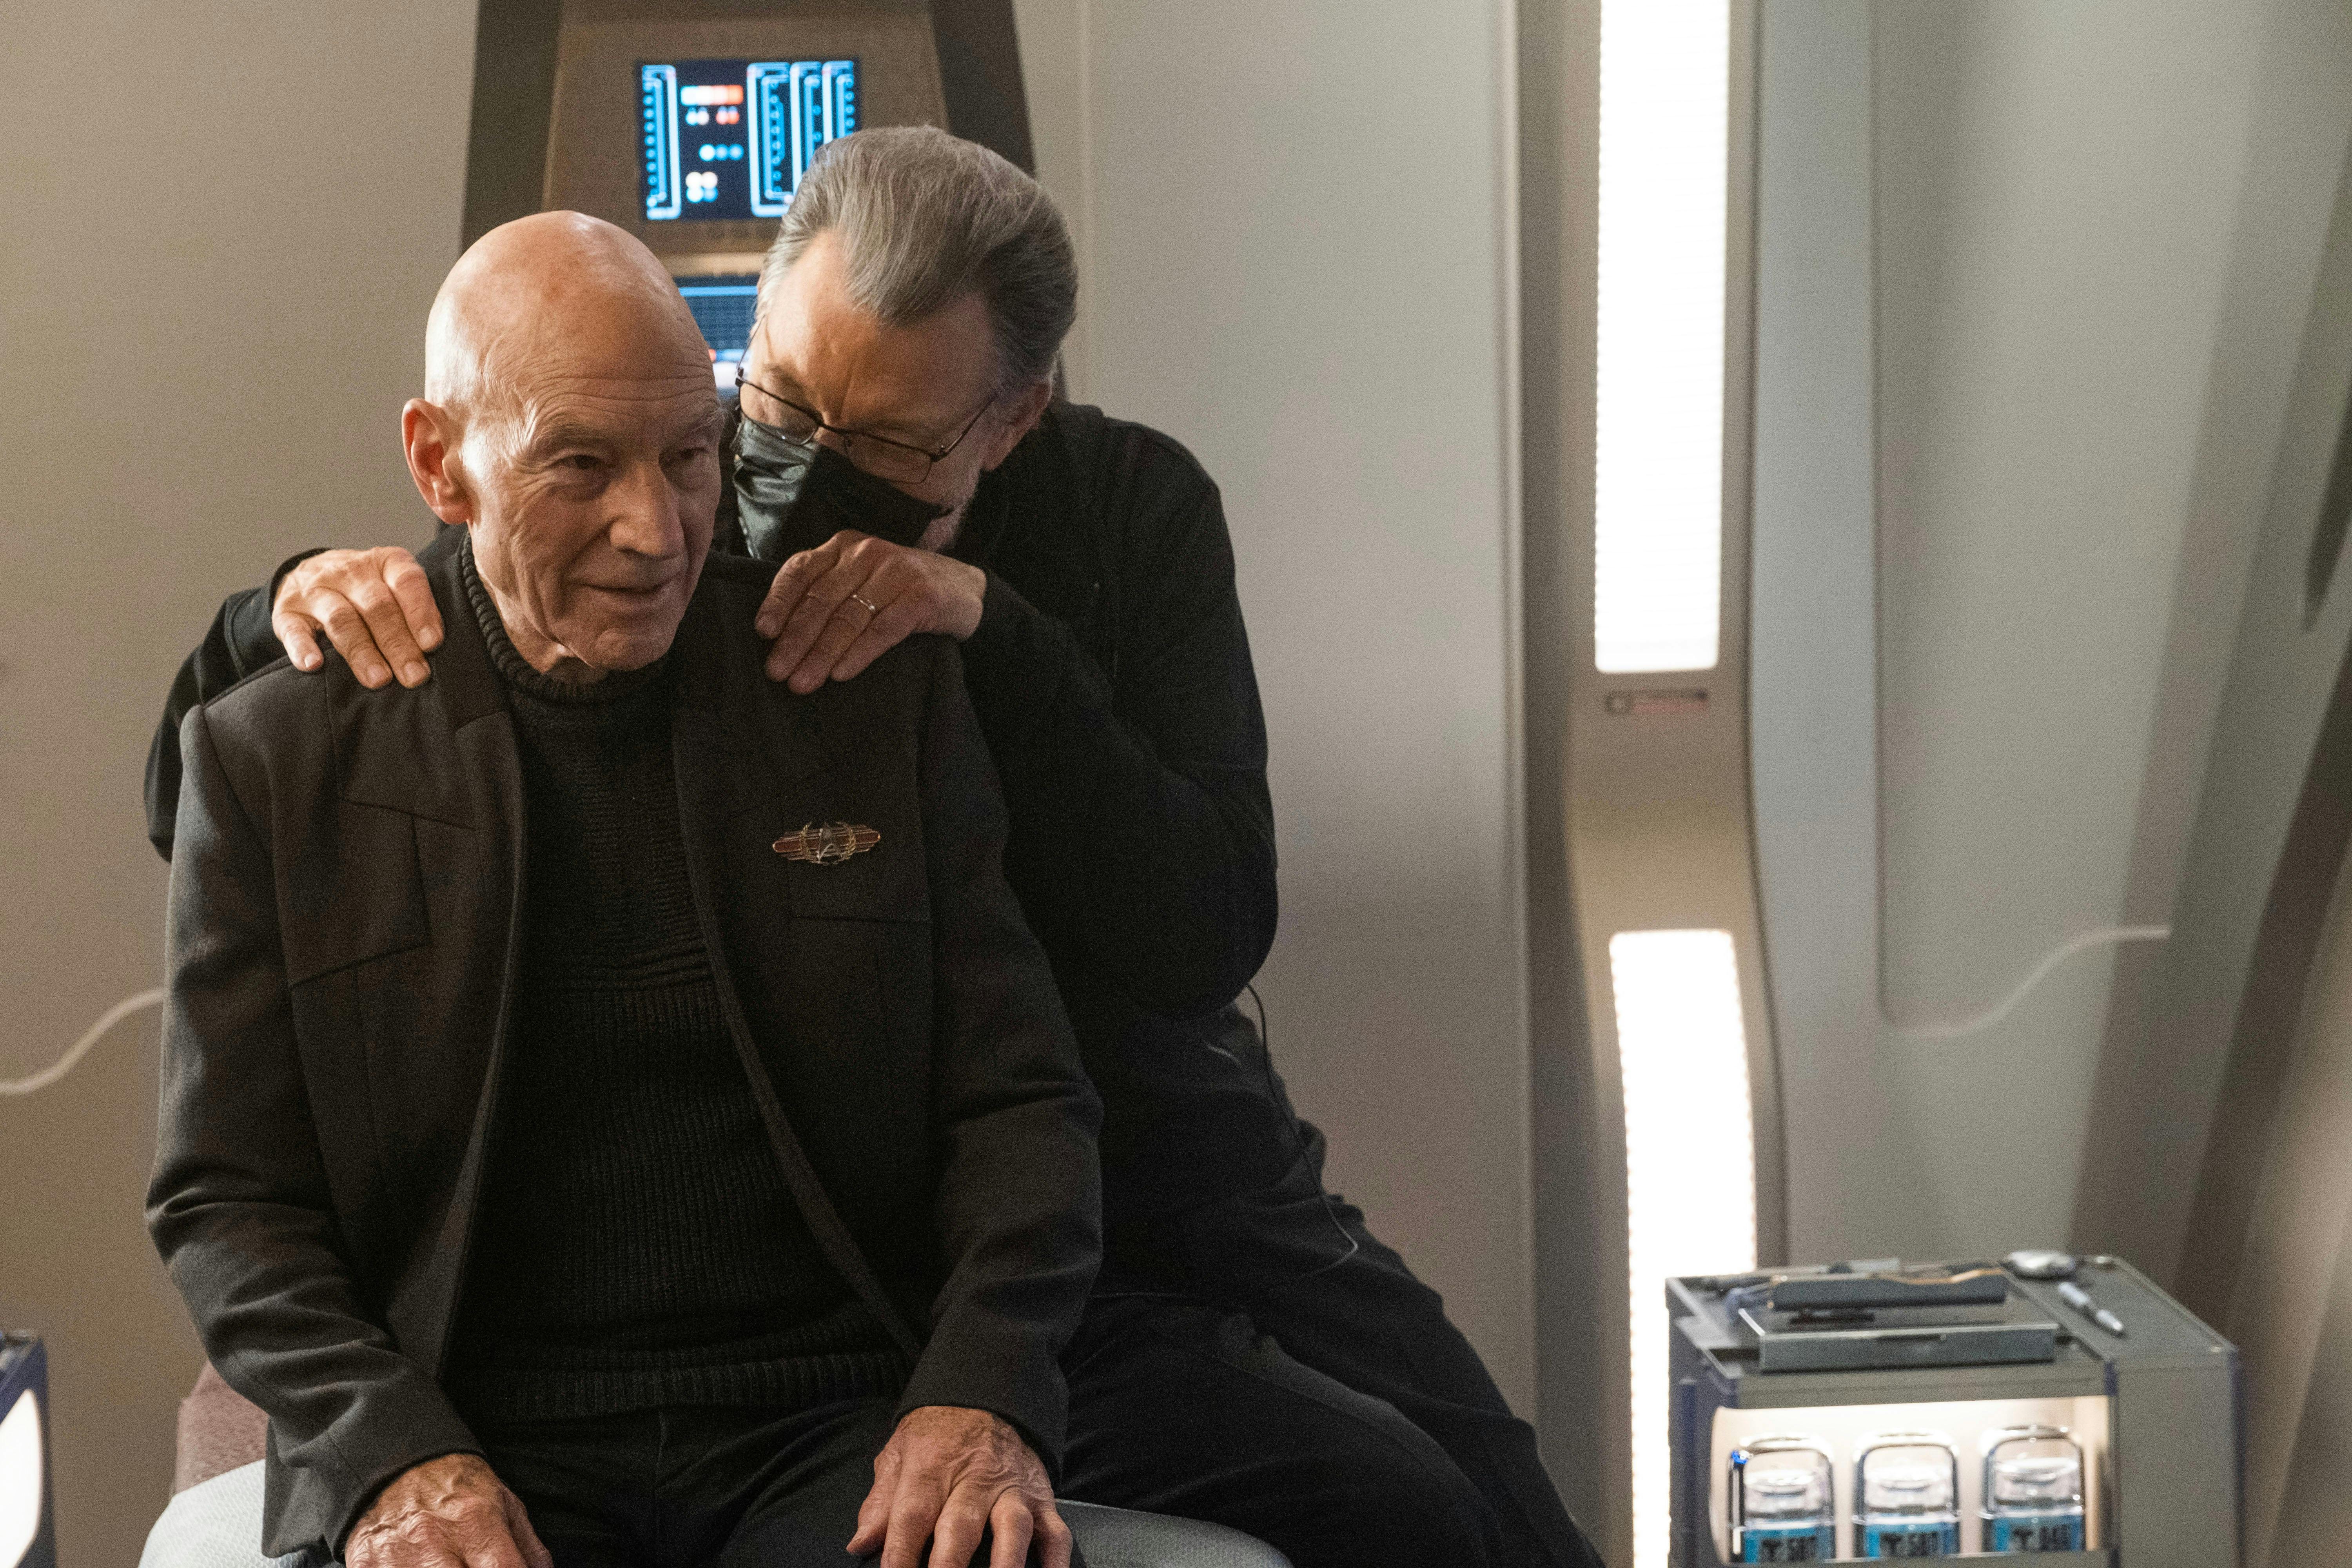 Star Trek: Picard BTS still - in Sickbay, Jonathan Frakes sits next to Patrick Stewart with his hands on his shoulder